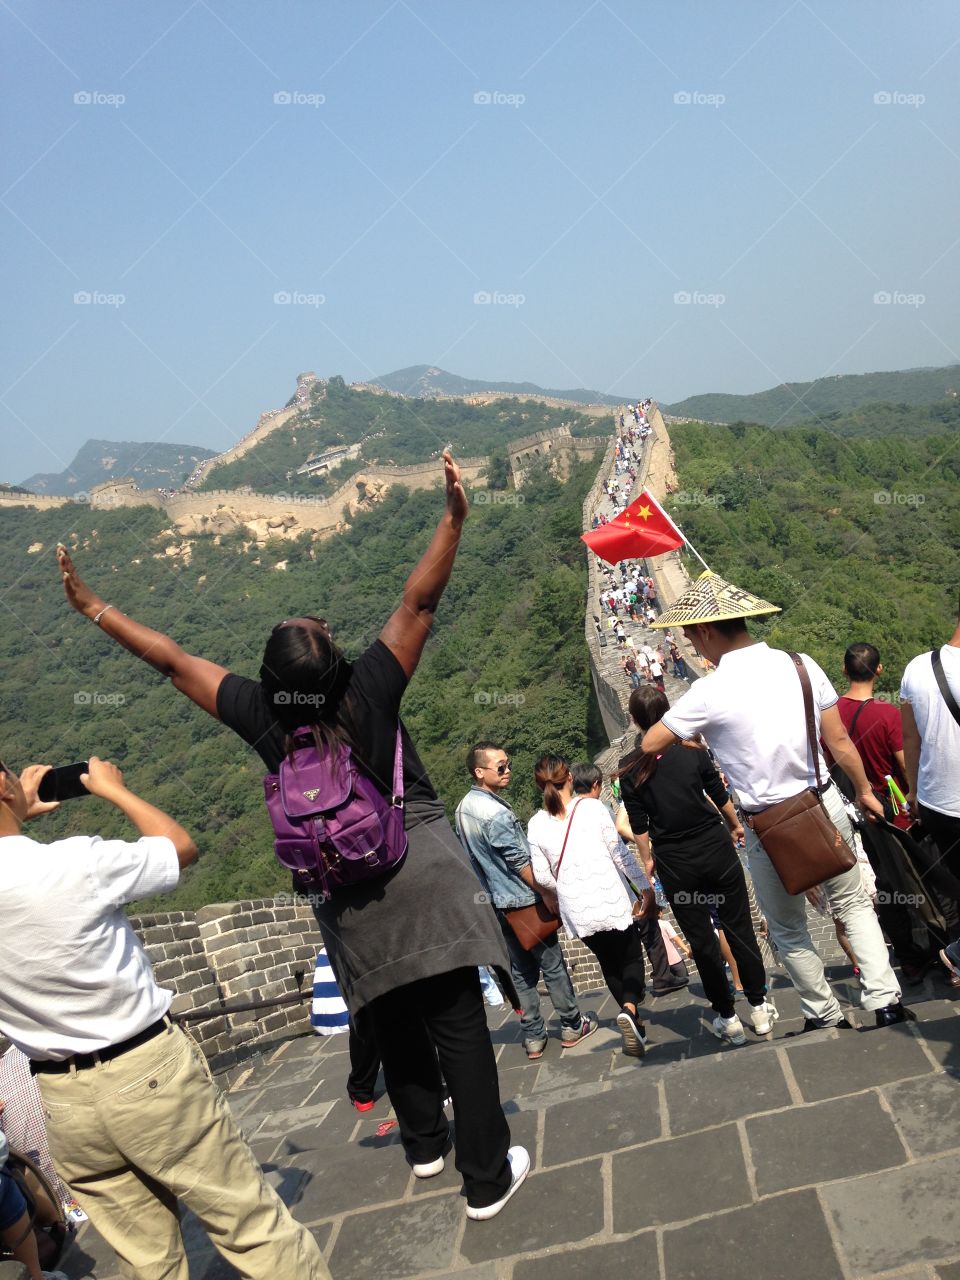 Victory in reaching the Great Wall of China!